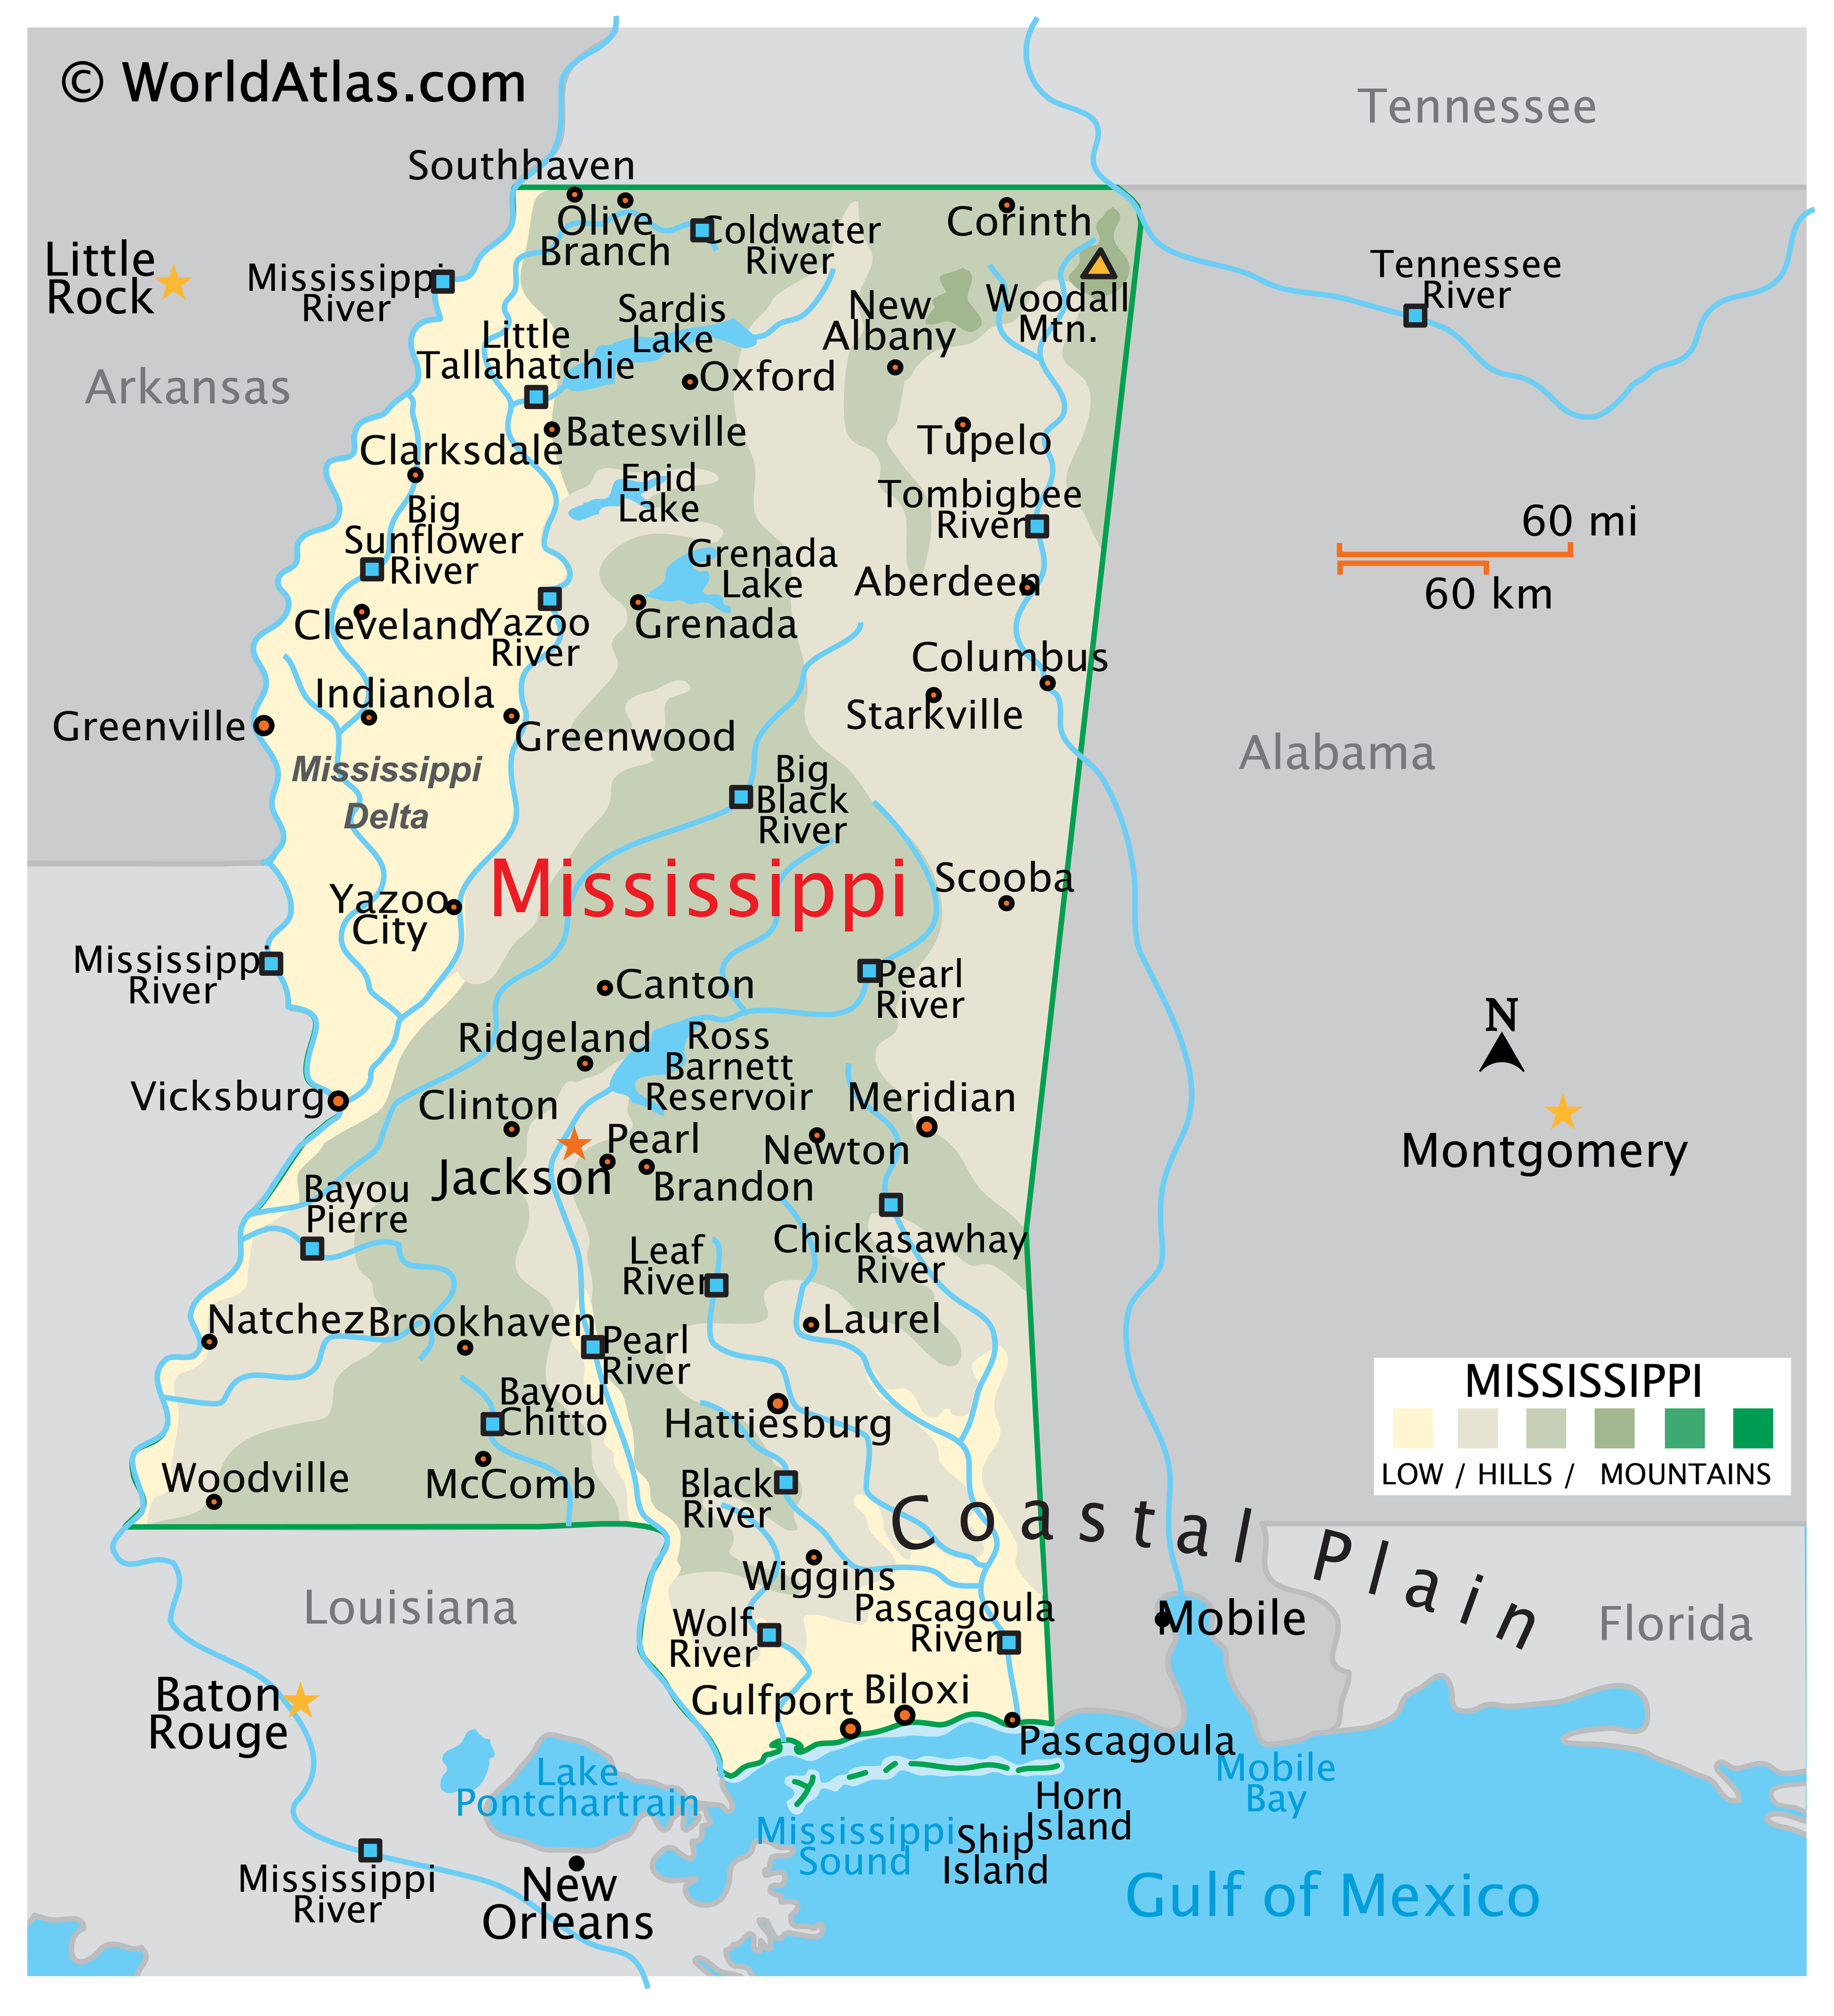 What are some important locations on a map of Mississippi?